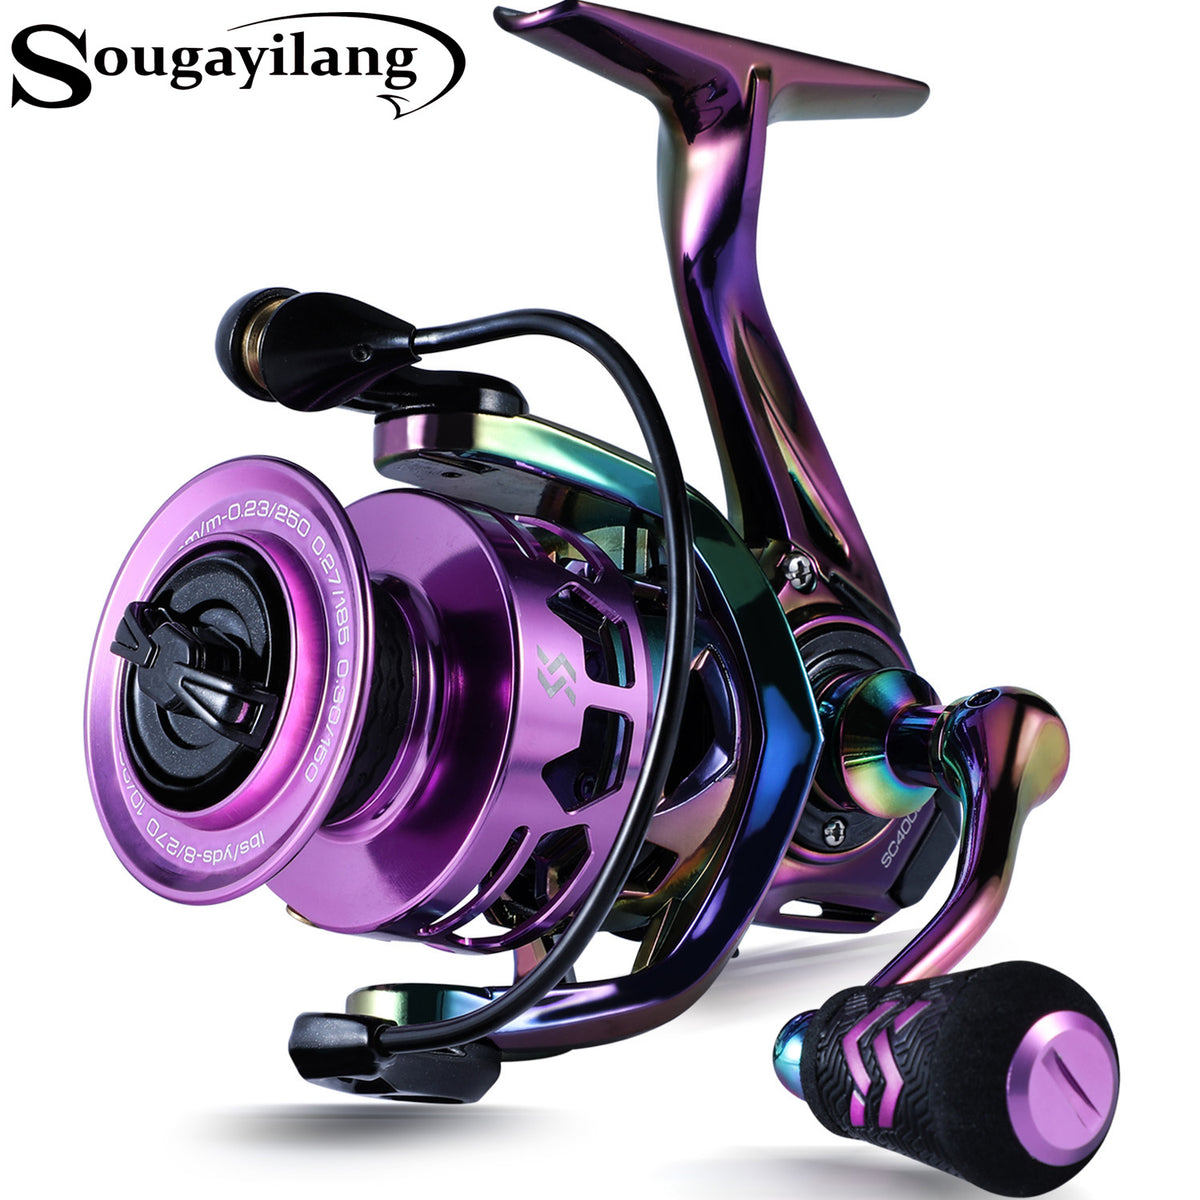 Sougayilang Fishing Reel, Colorful Ultralight Spinning Reels with Gra